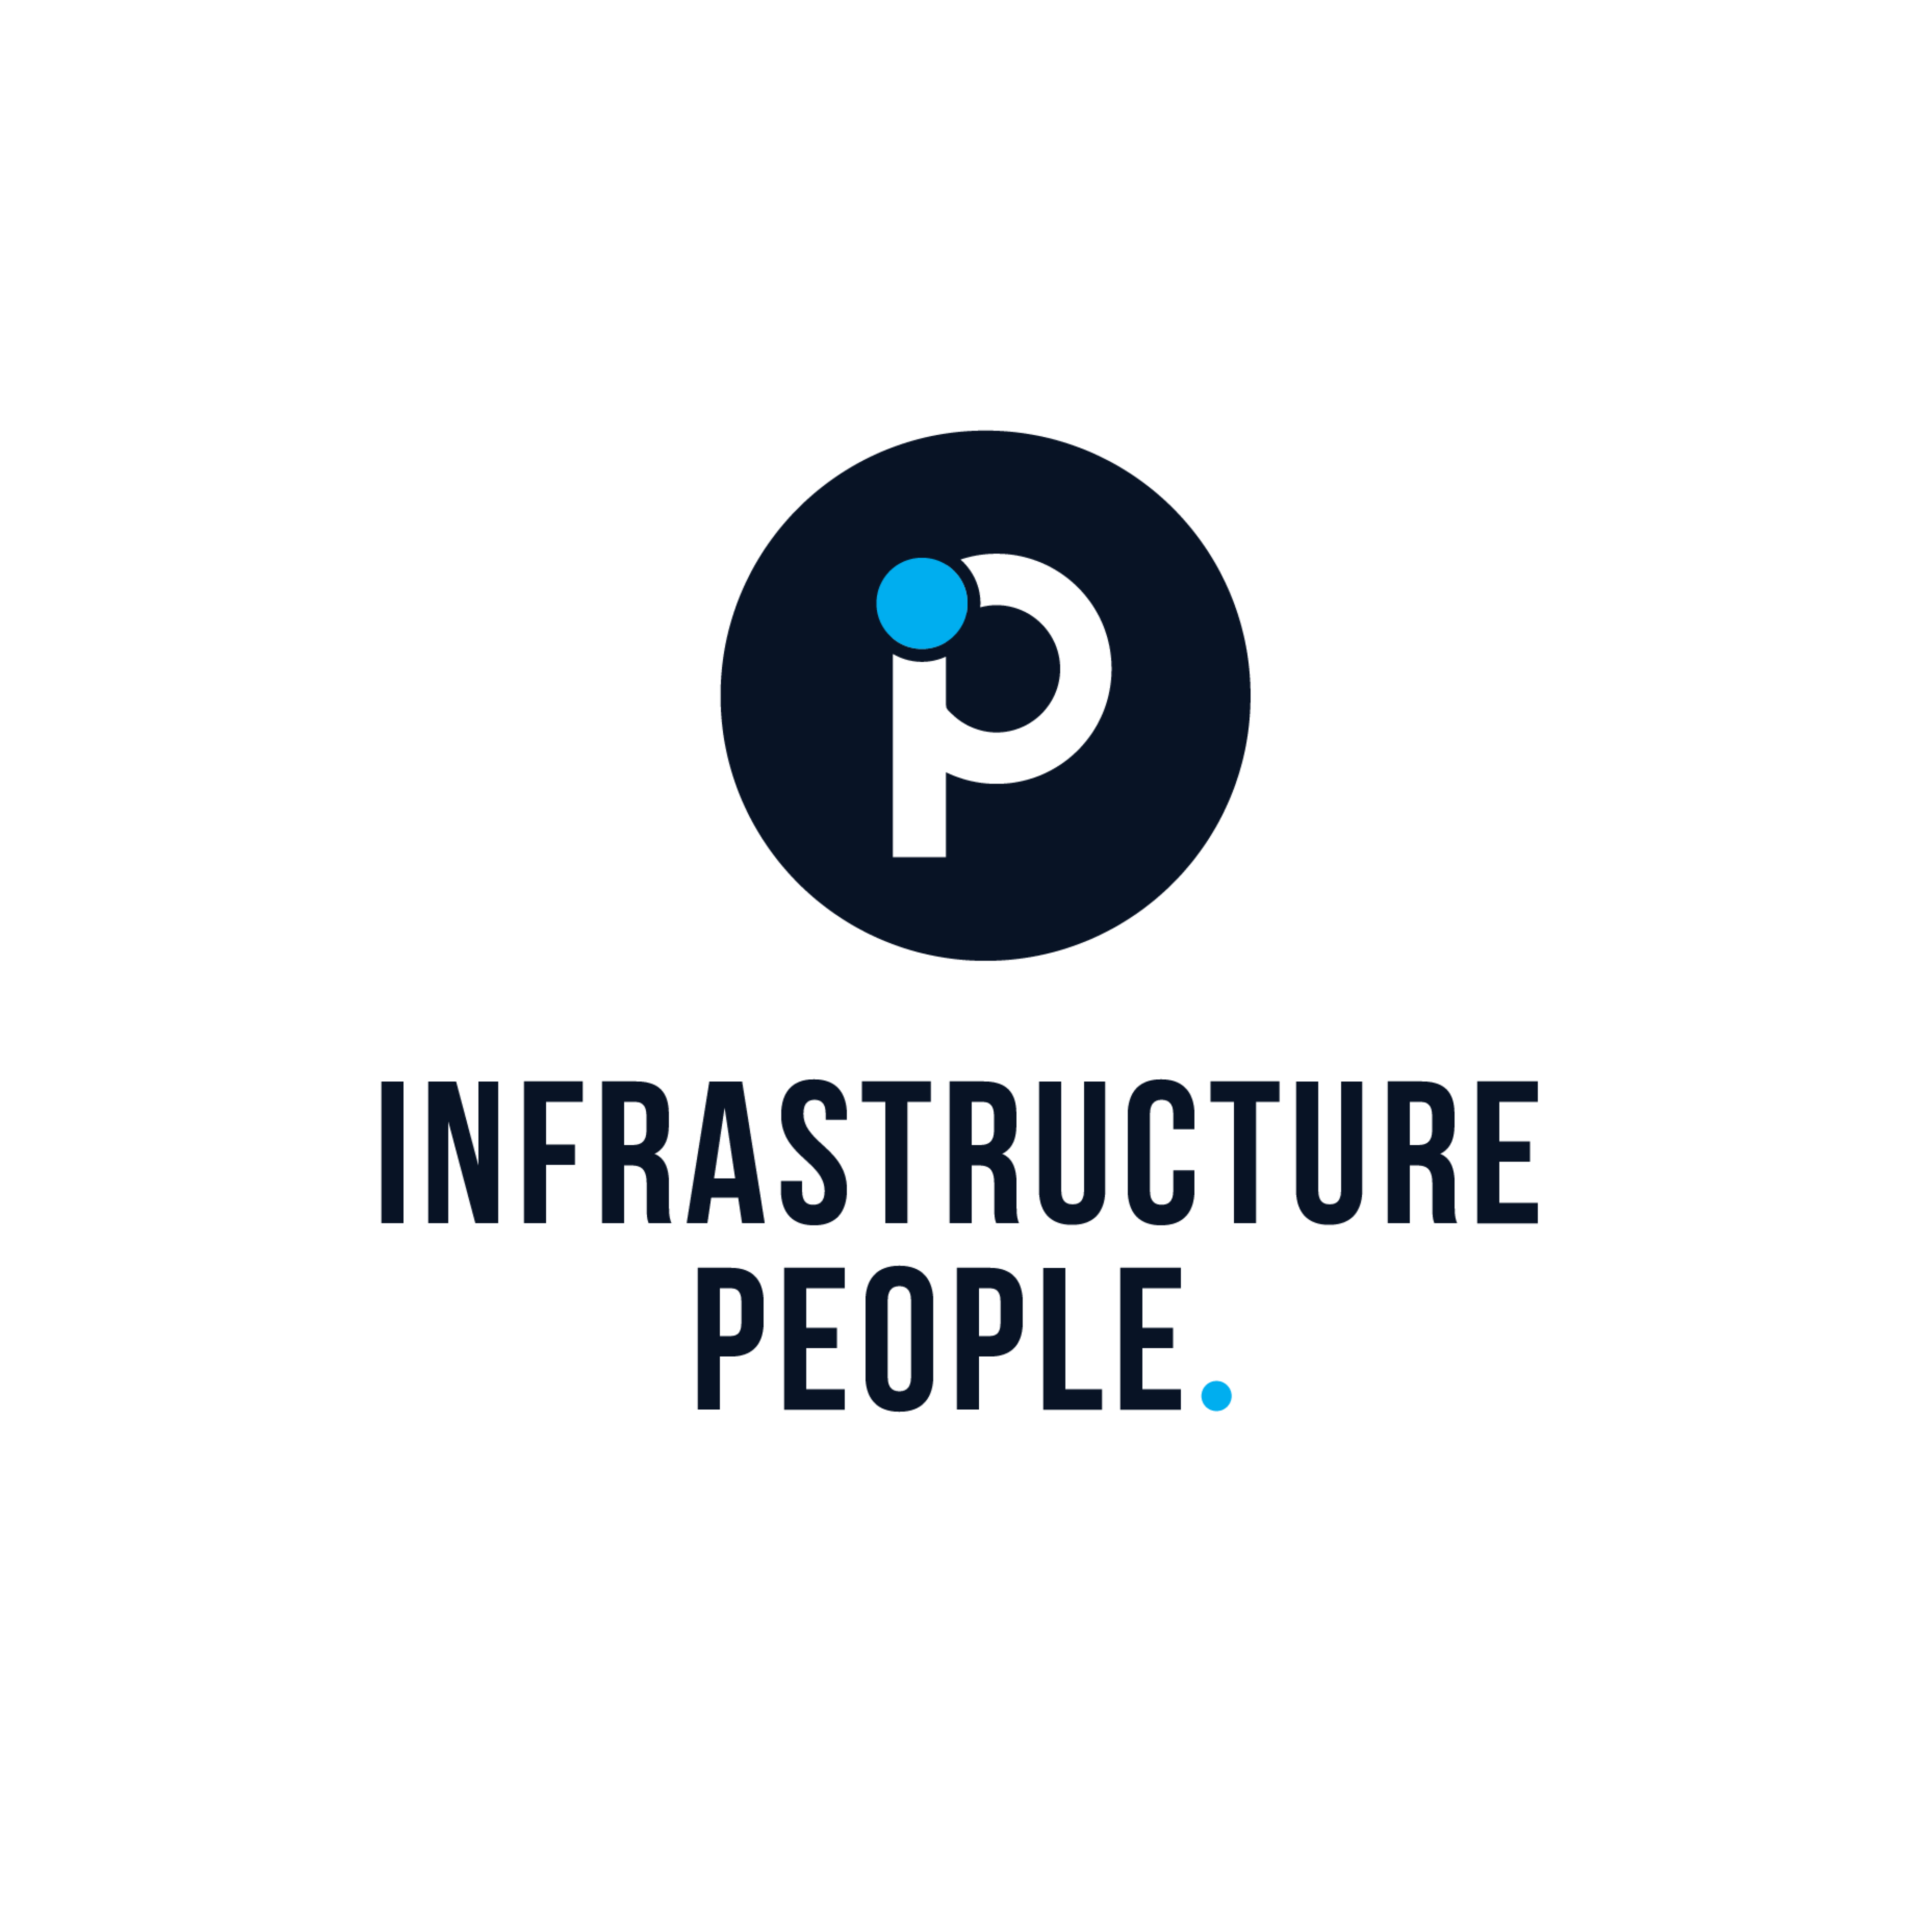 Infrastructure People